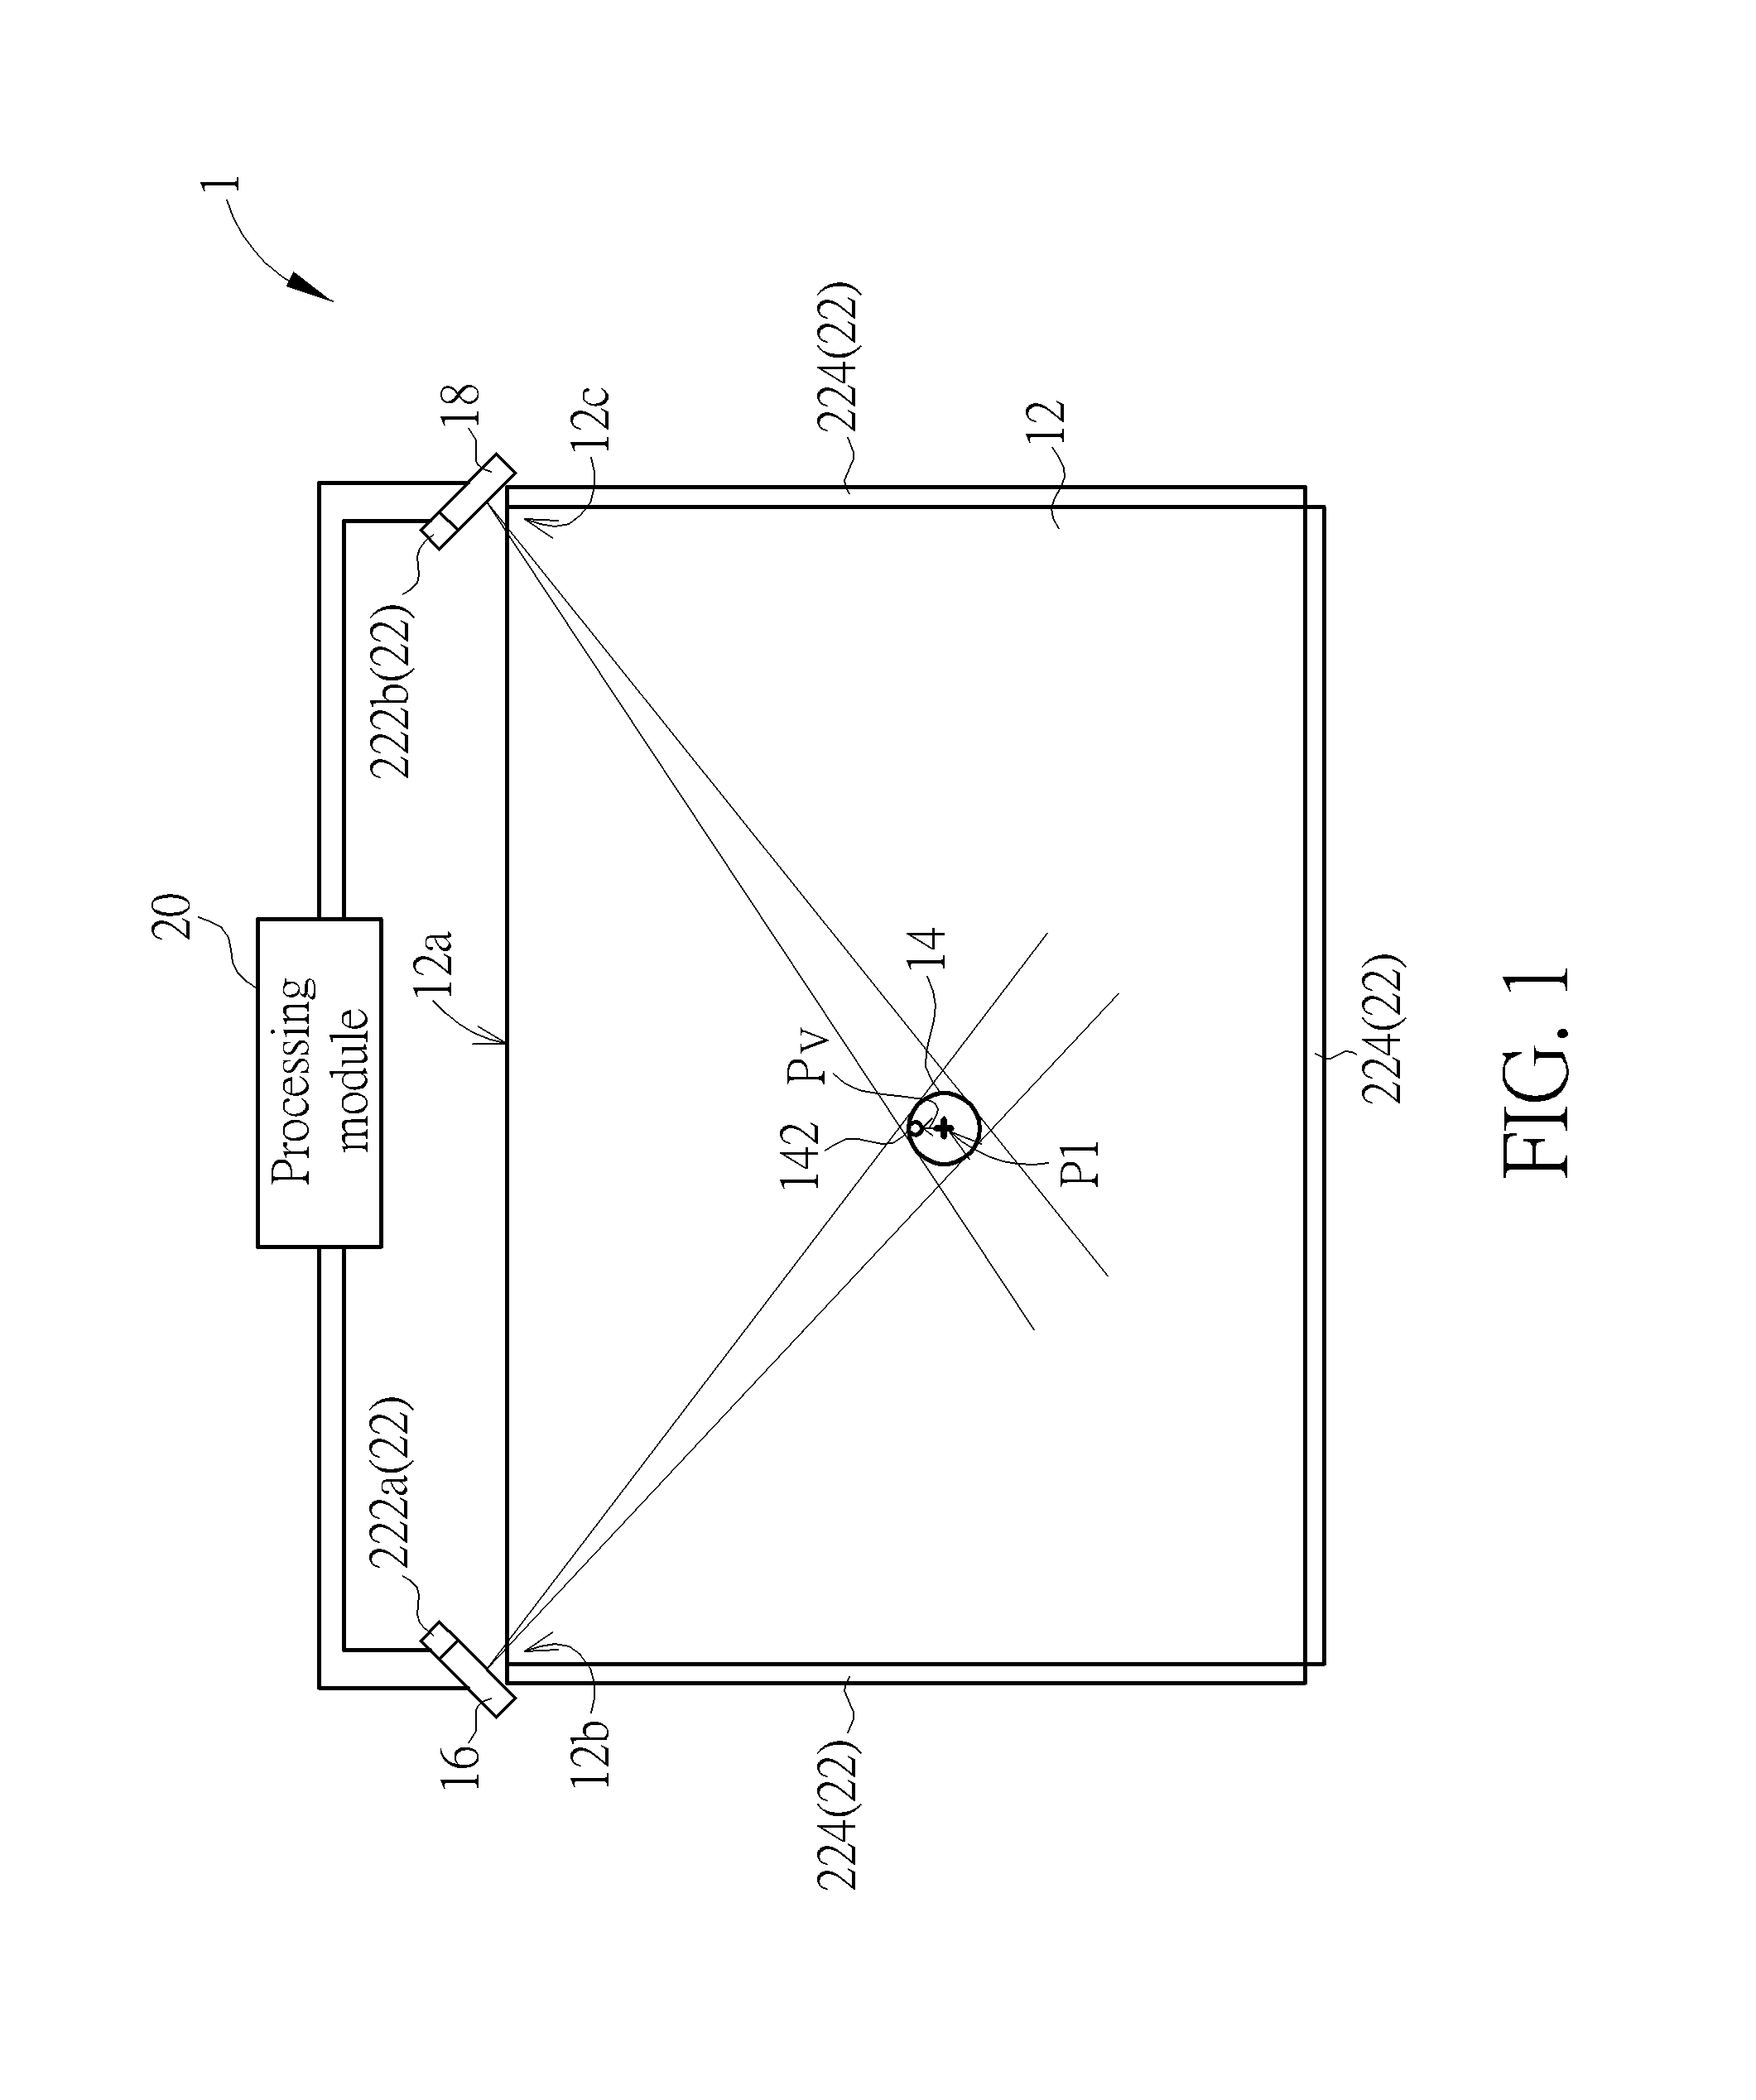 Touch locating method and optical touch system